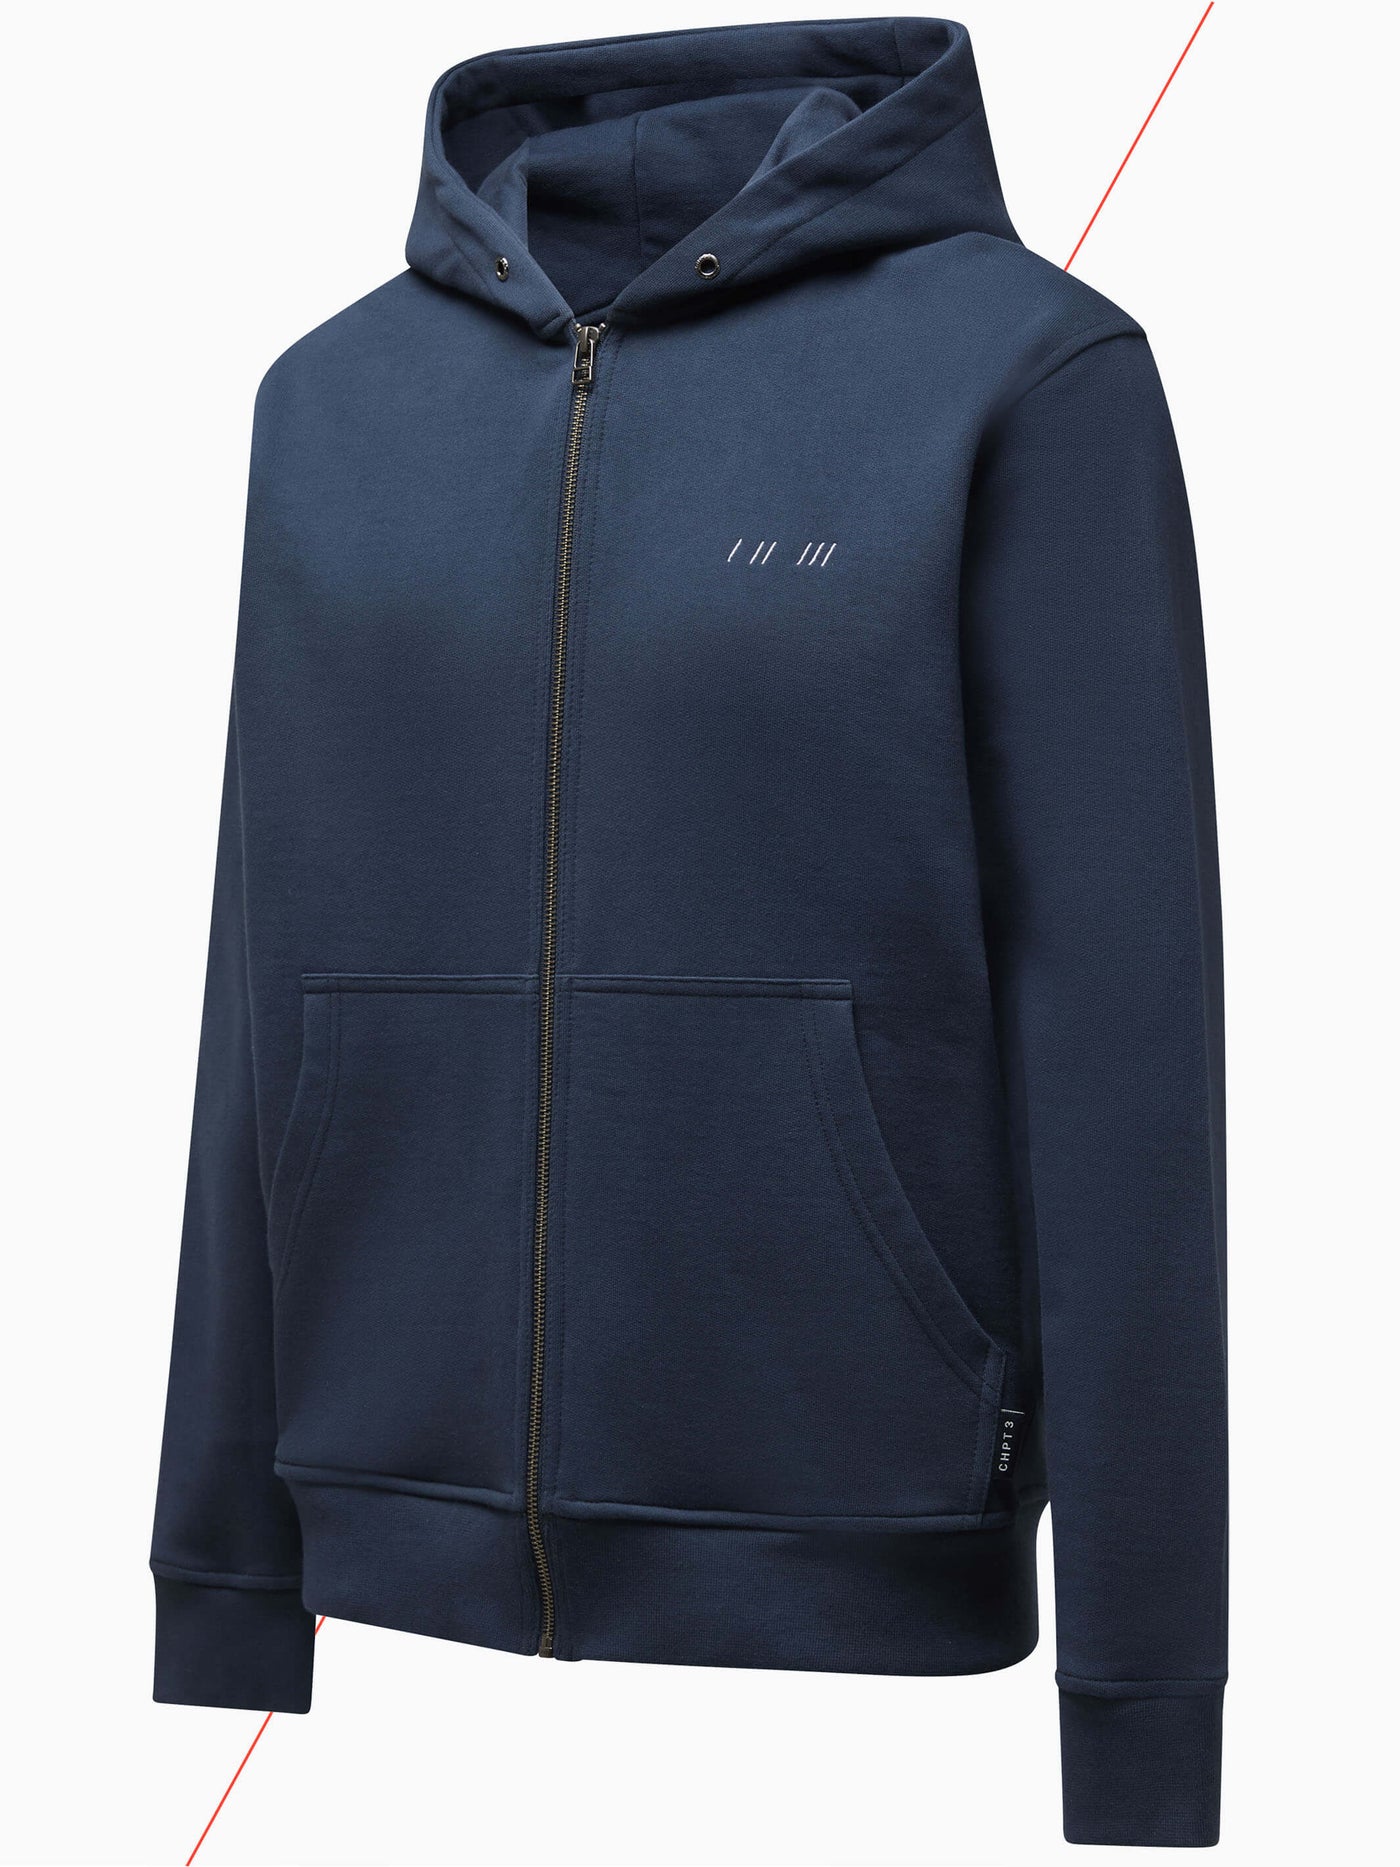 Photo of CHPT3 Elysée Cotton zip hoodie, in Outer Space Navy blue, viewed from the side